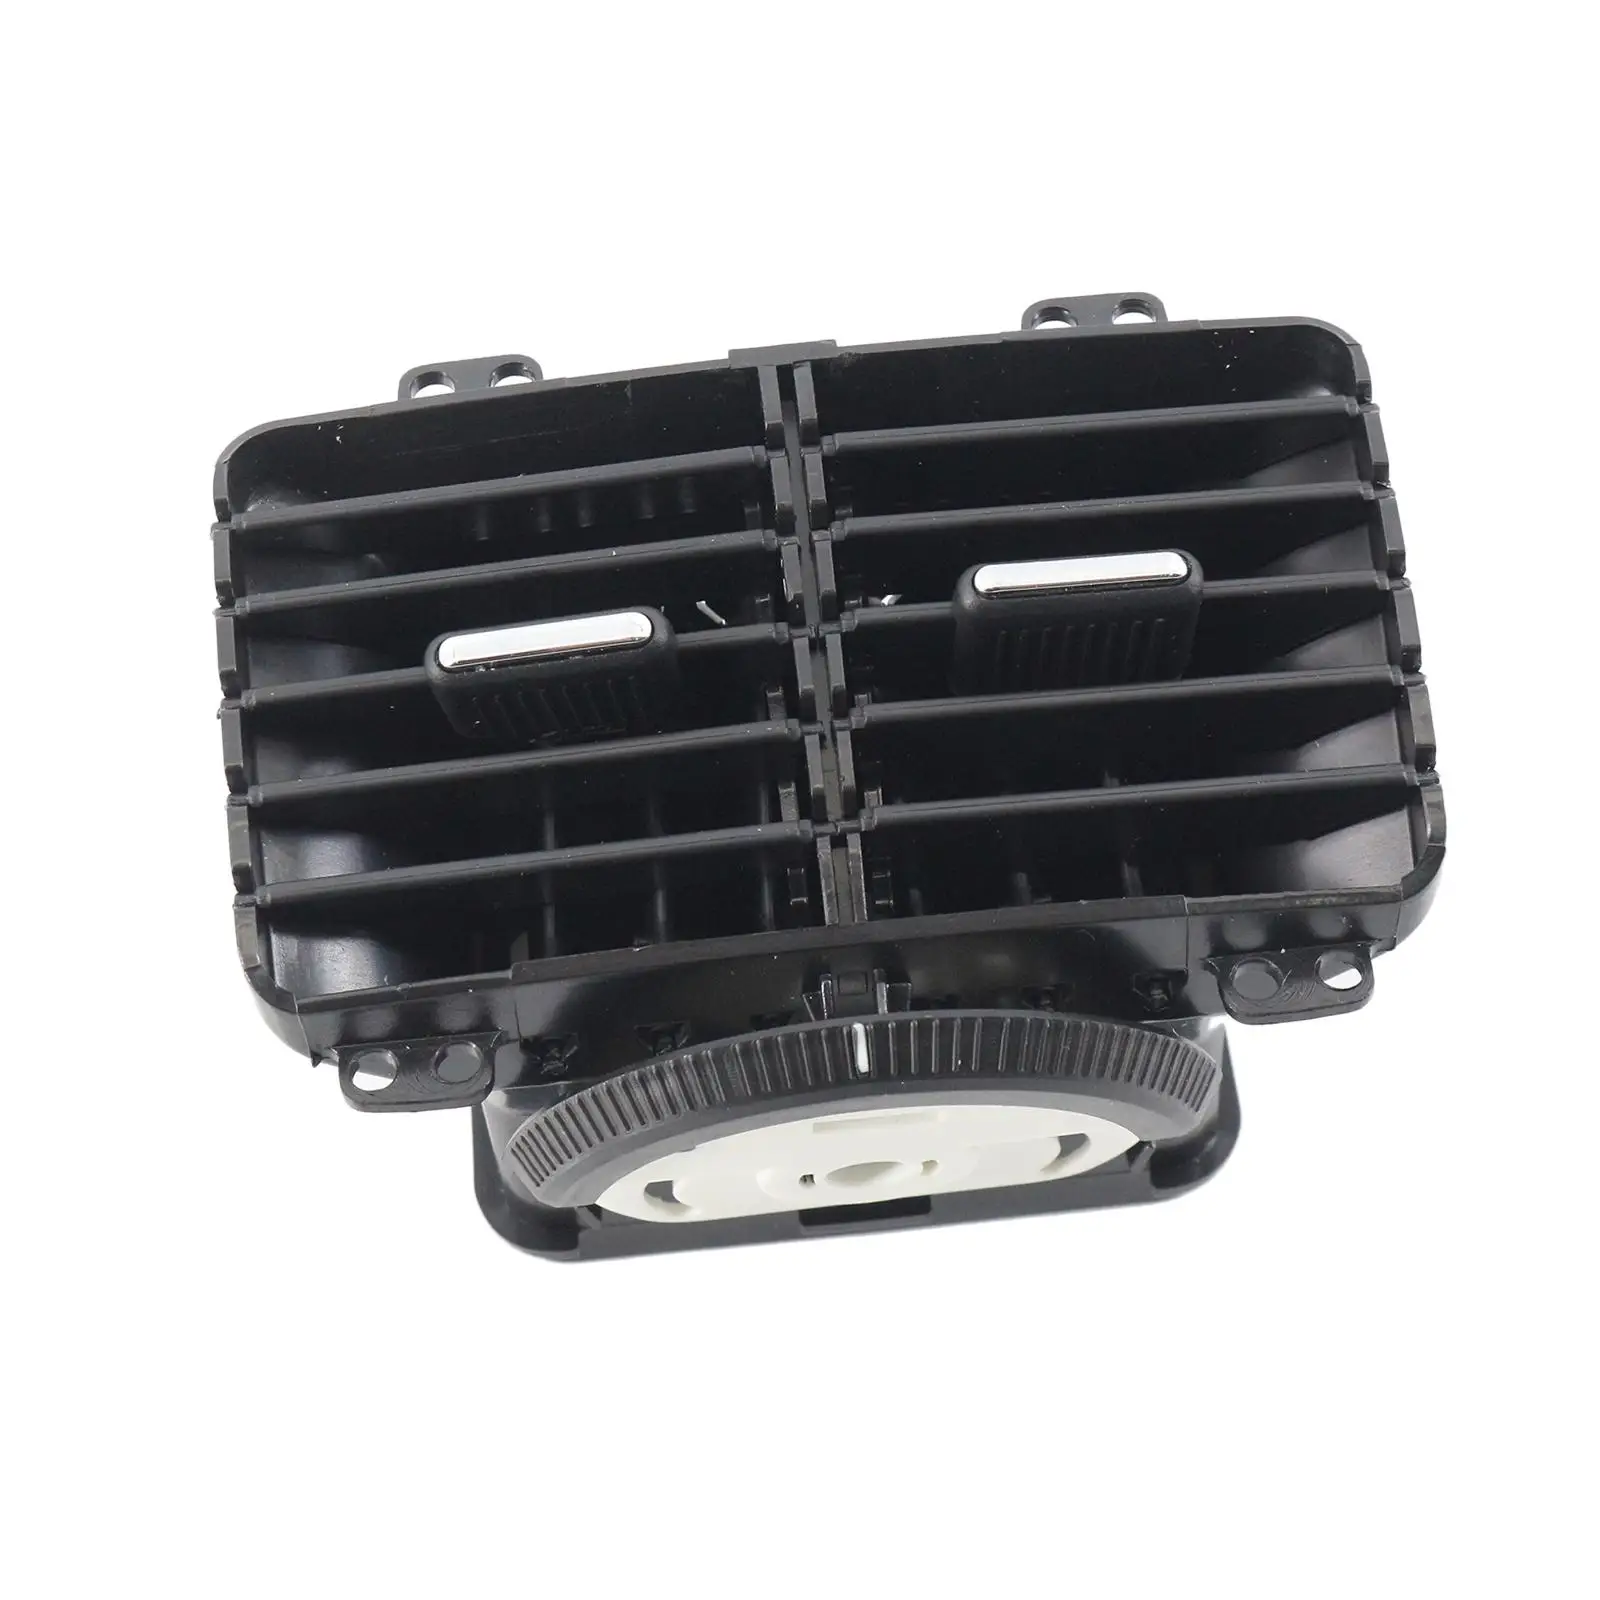 Auto Rear Air Outlet Ventilation 1K0819203A 1KD 819 203 1KD819203A for VW Golf